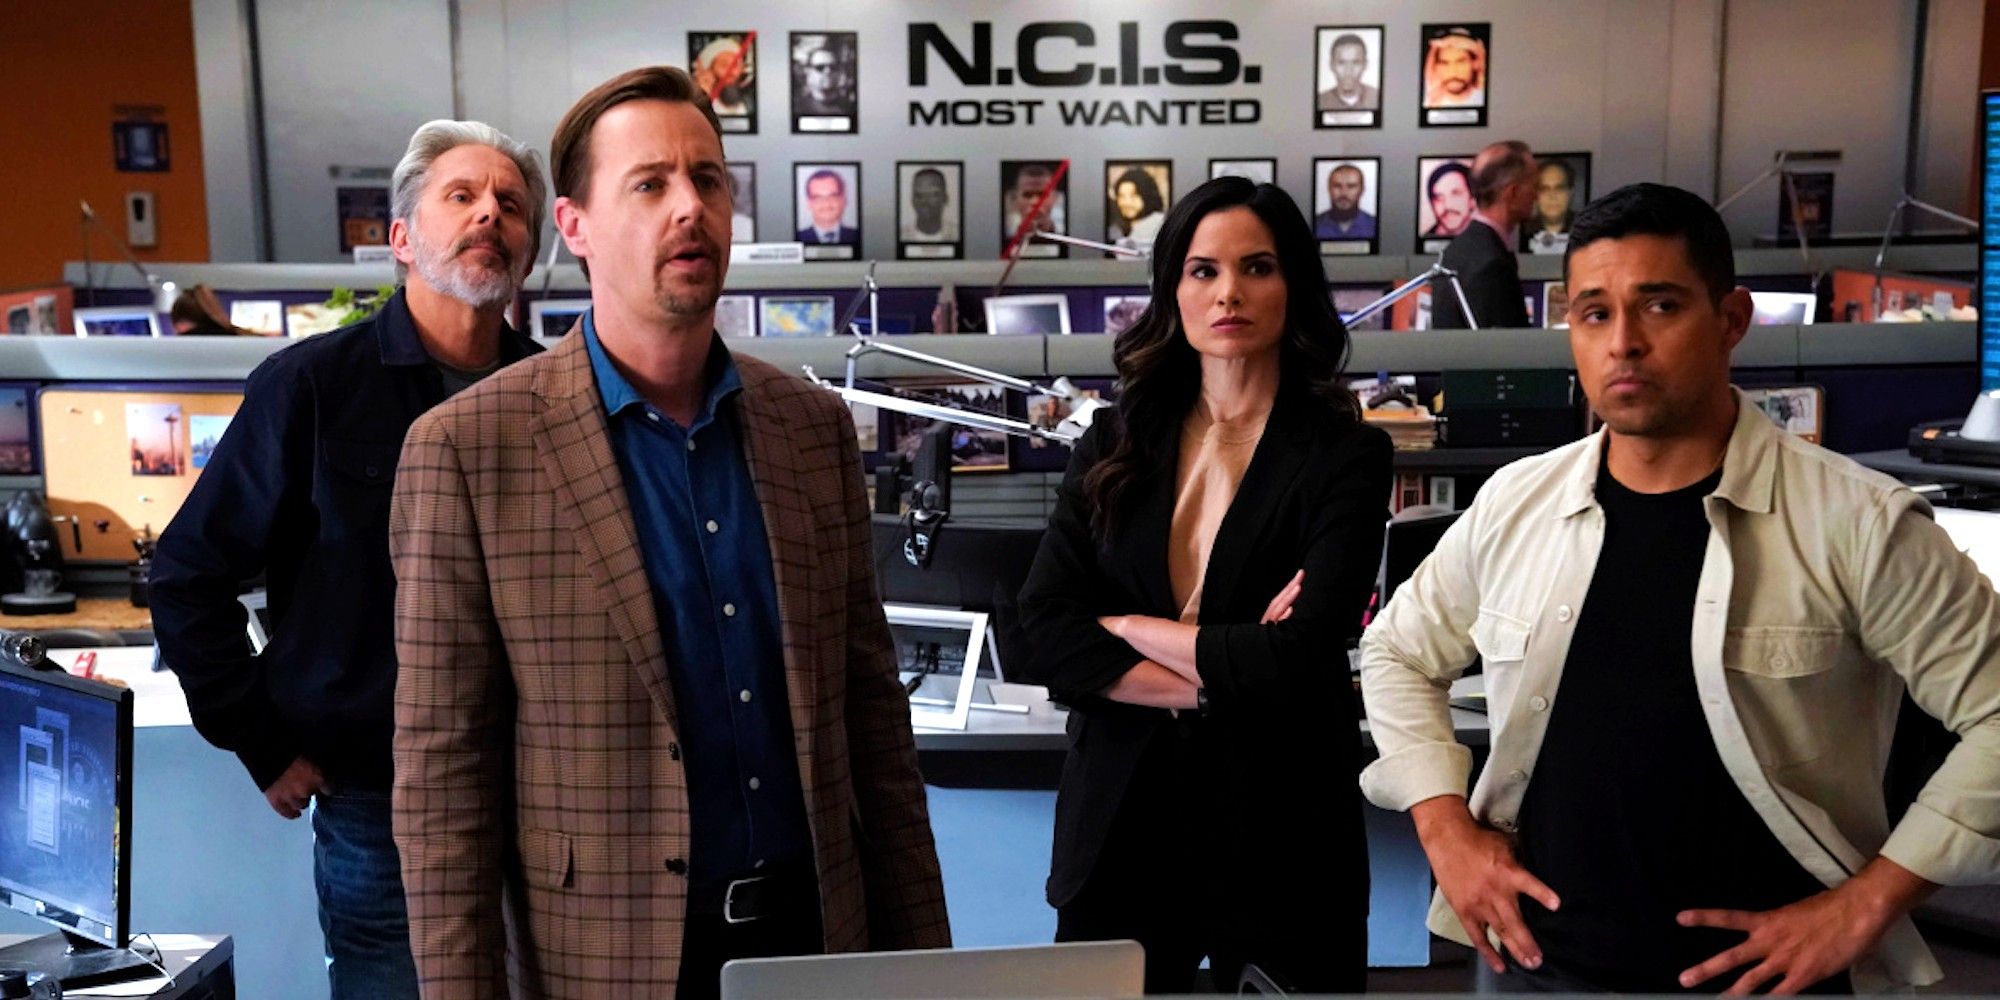 Sean Murray as Timothy McGee, Gary Cole as Alden Parker, Katrina Law as Jessica Knight, and Wilmer Valderrama as Nick Torres in the bullpen during NCIS season 19